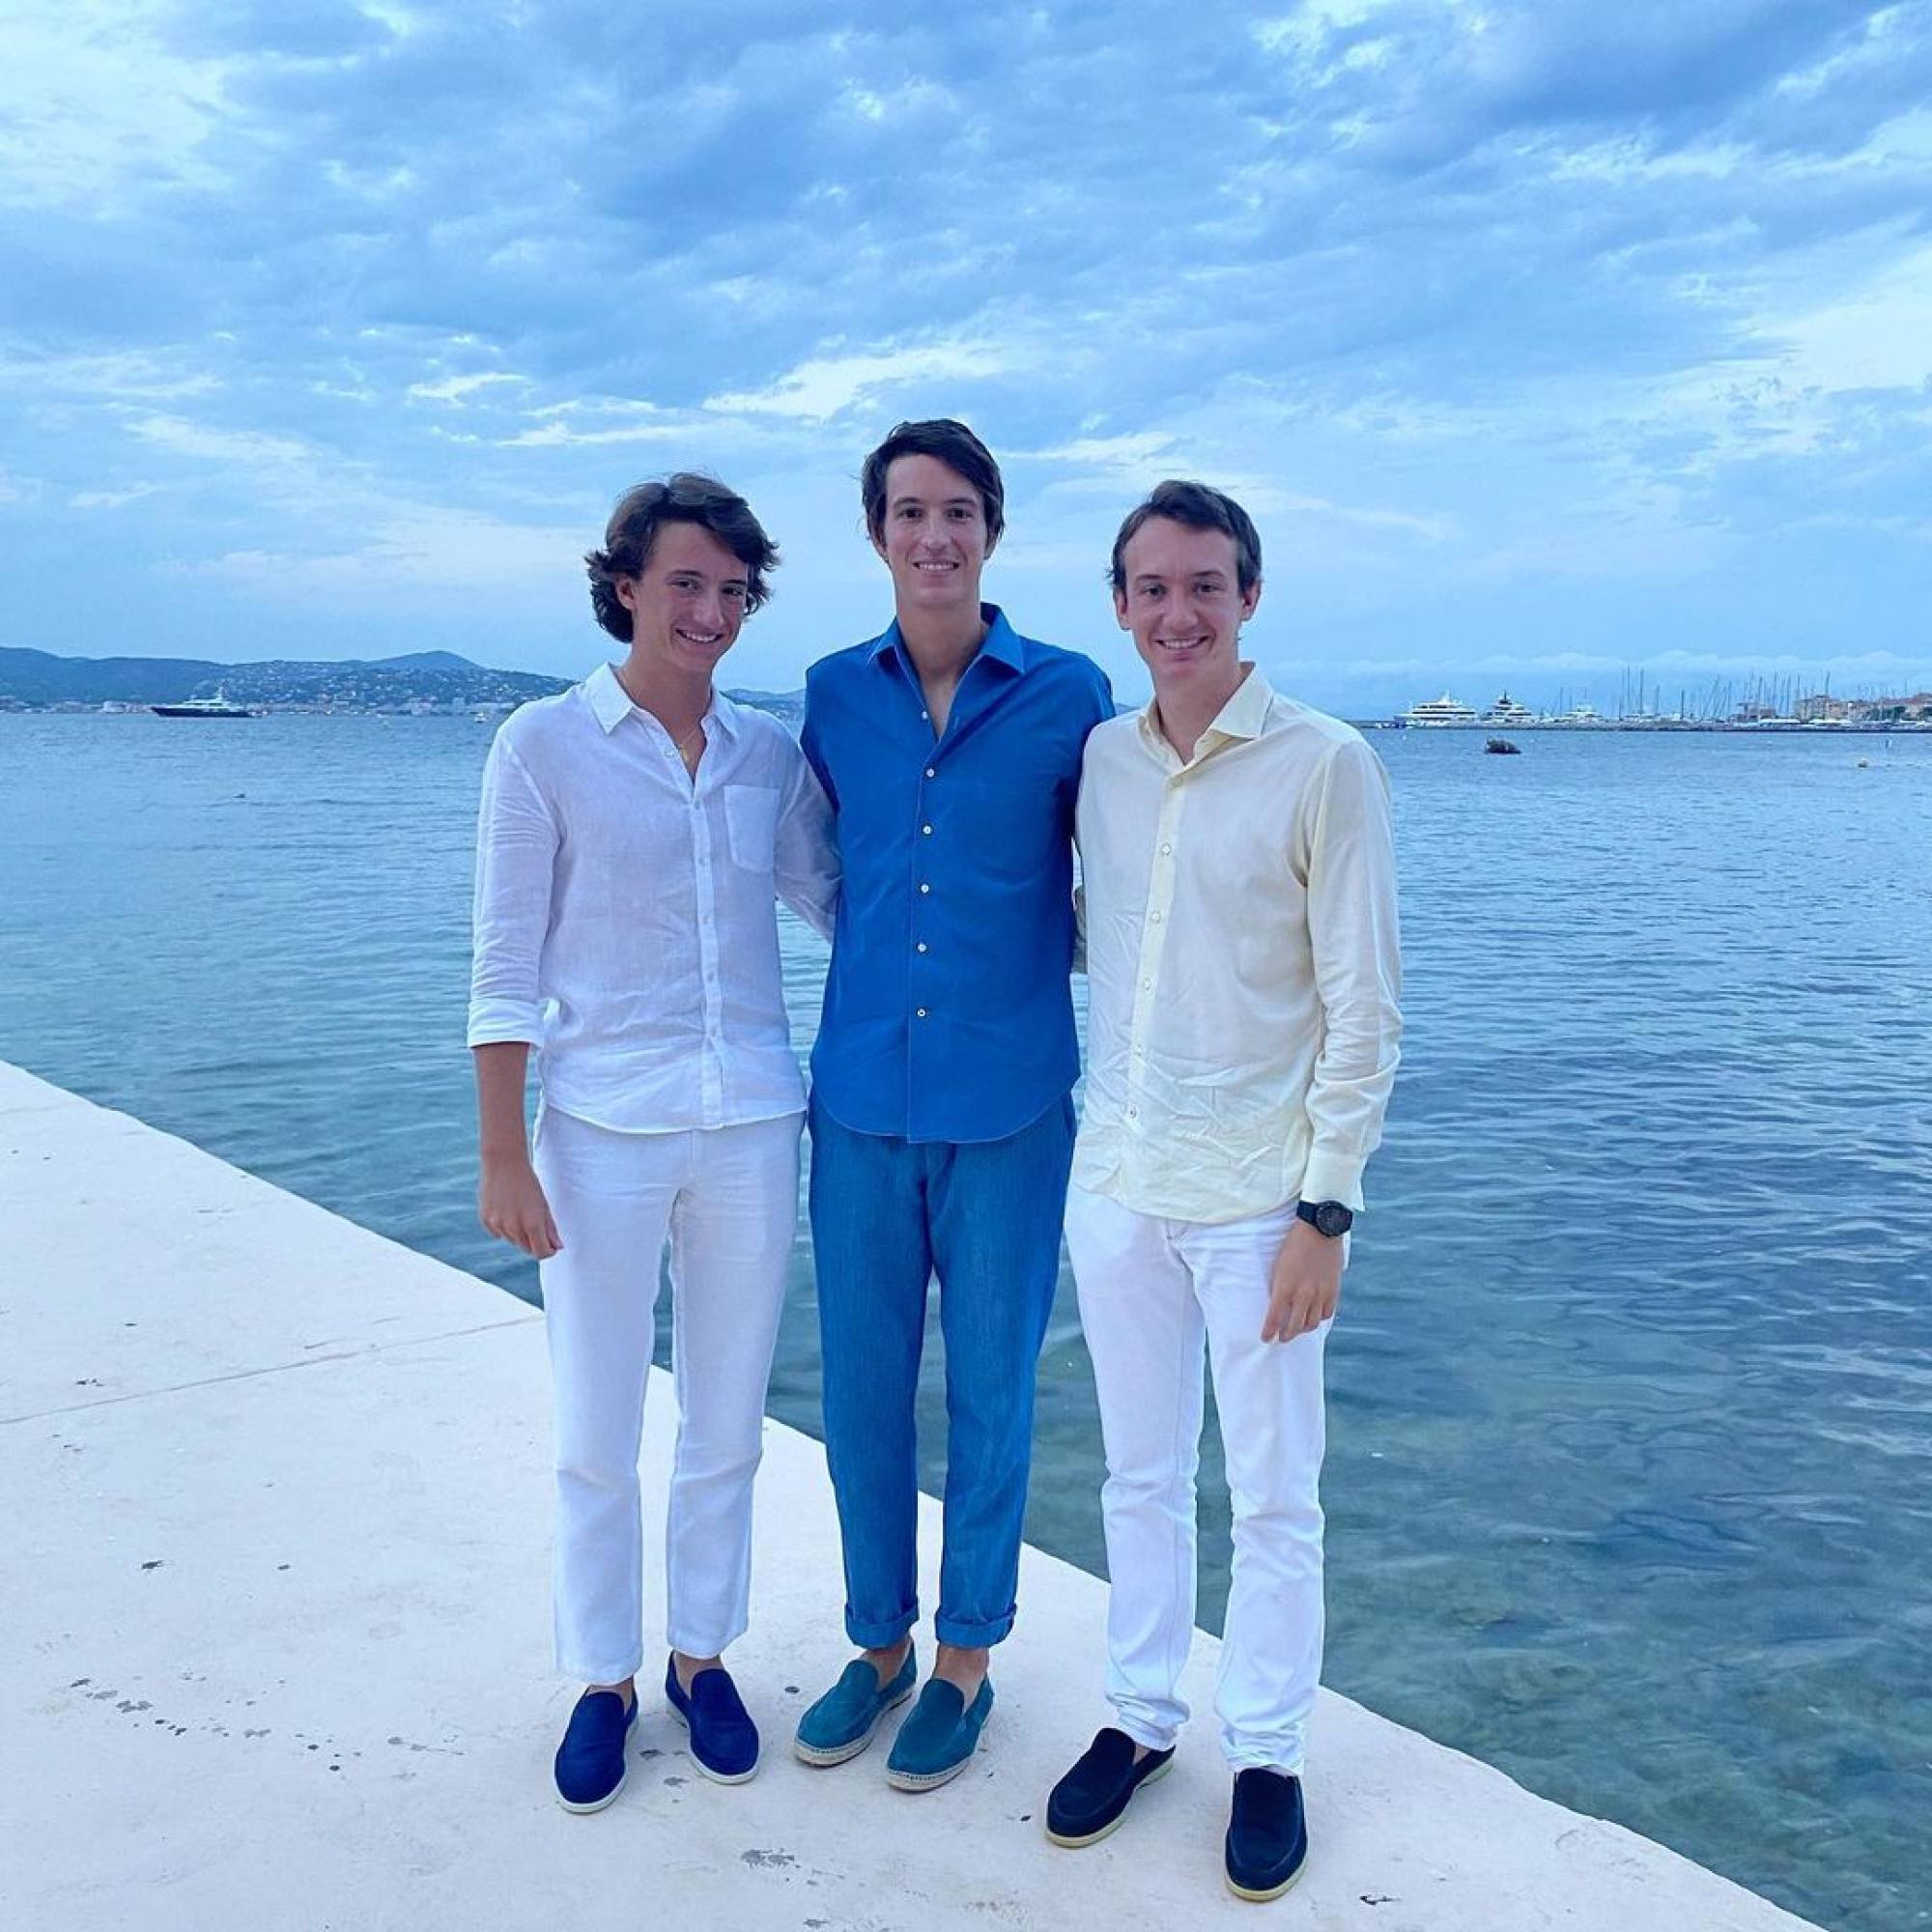 Meet Alexandre Arnault, the hunky son of LVMH billionaire Bernard Arnault,  Europe's richest man: he's worked with Beyoncé and Blackpink's Rosé, and  Kanye West performed at his wedding